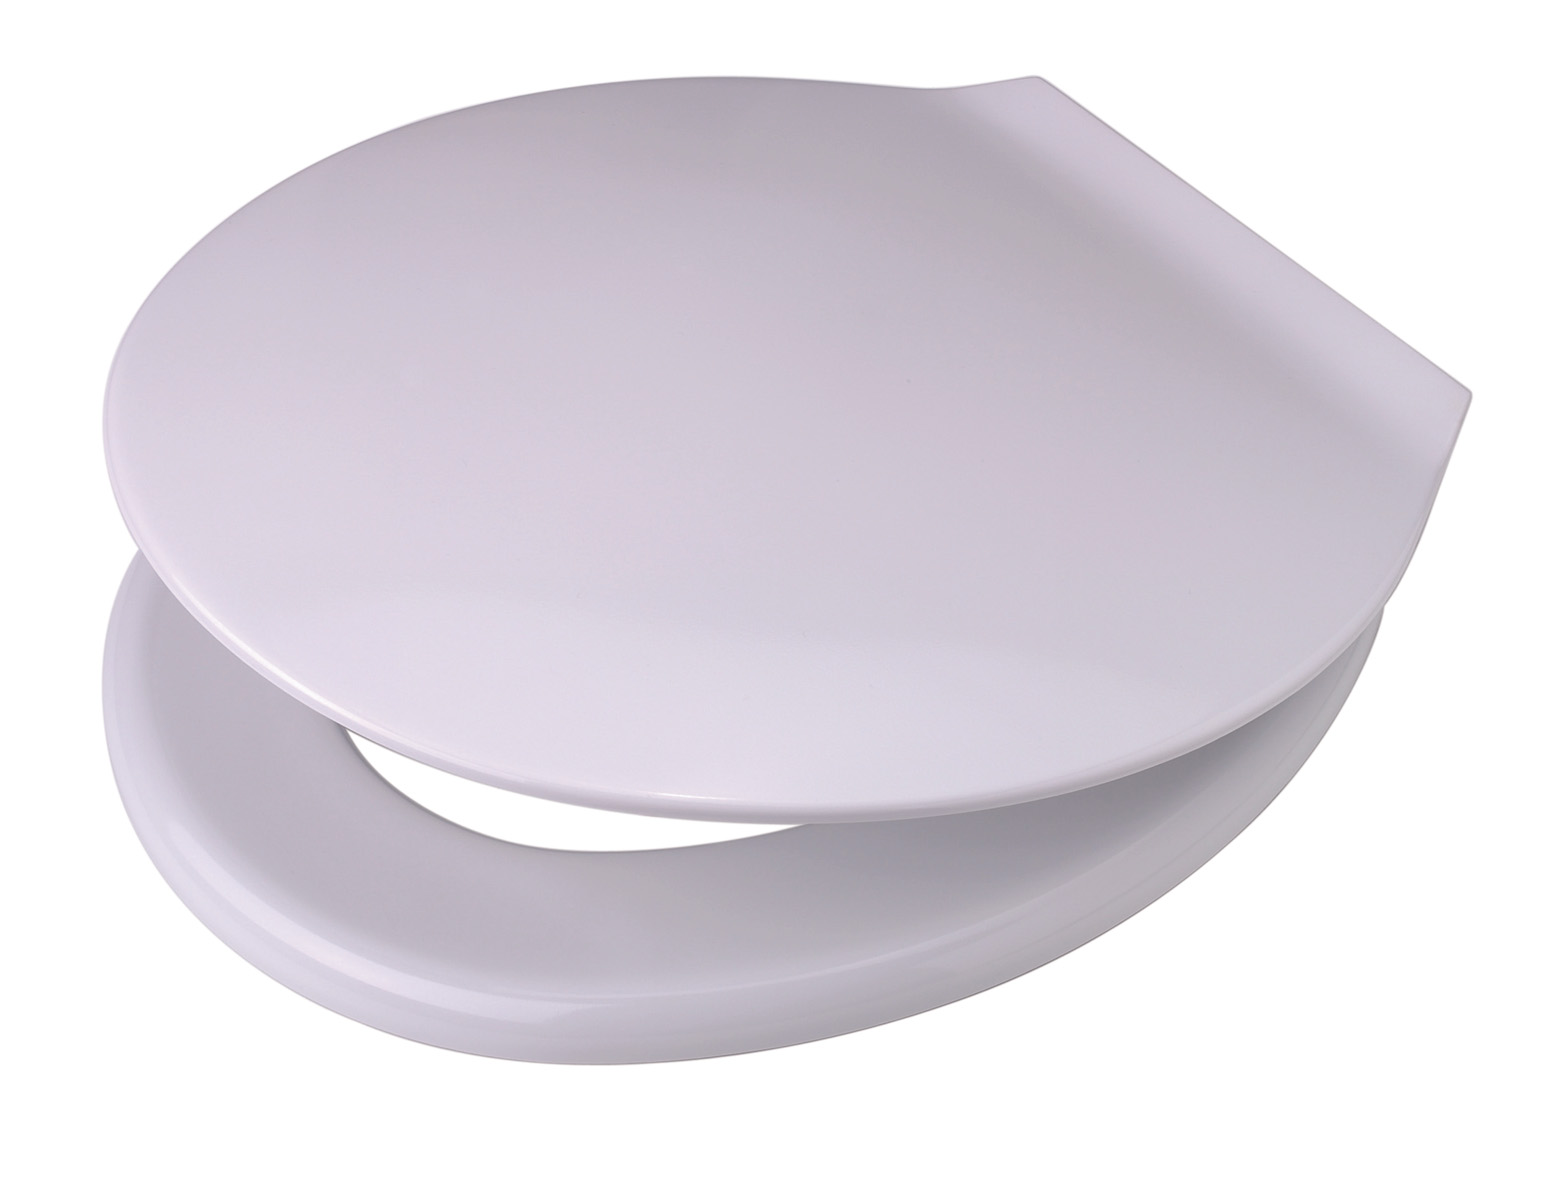 PAGETTE Exclusive toilet seat with cover 790821602 white resmi